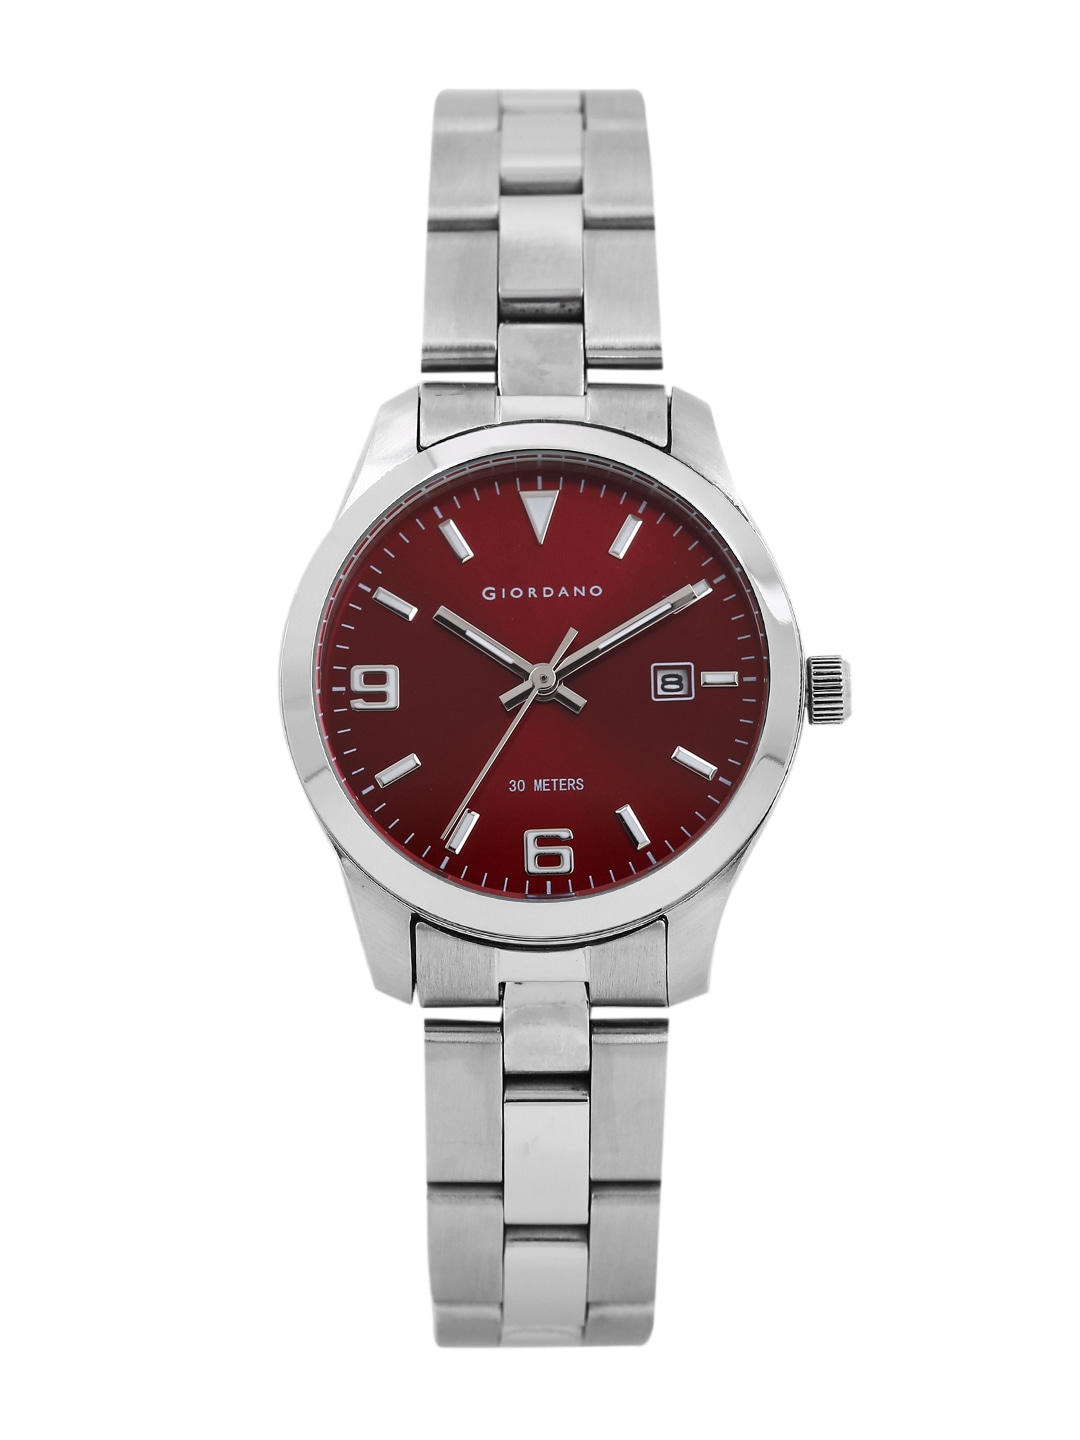 GIORDANO Women Red Analogue Watch P2061-44 Price in India